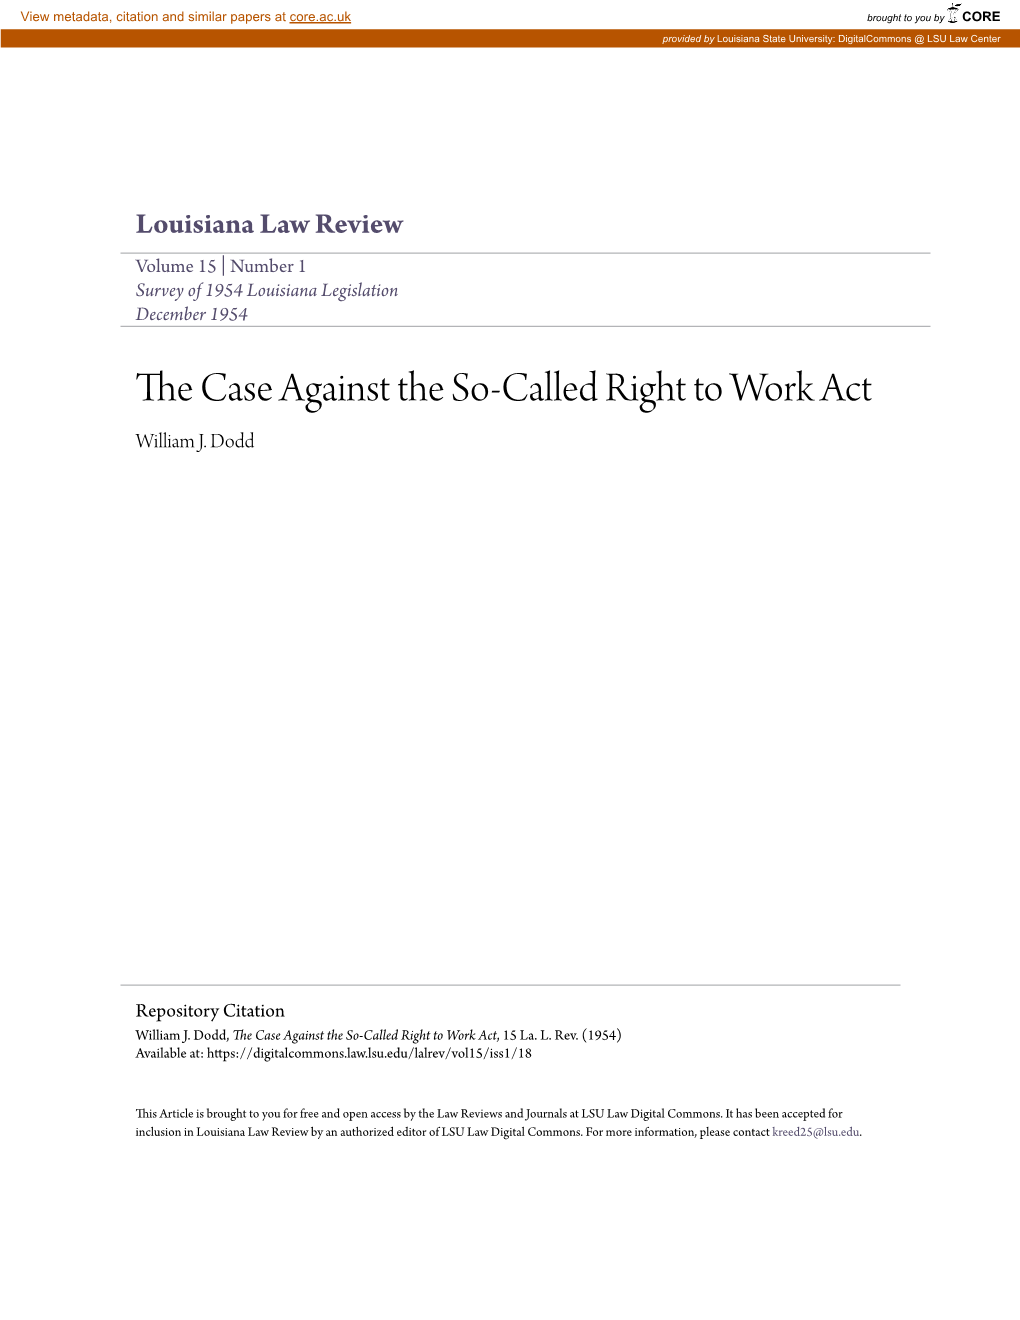 The Case Against the So-Called Right to Work Act, 15 La